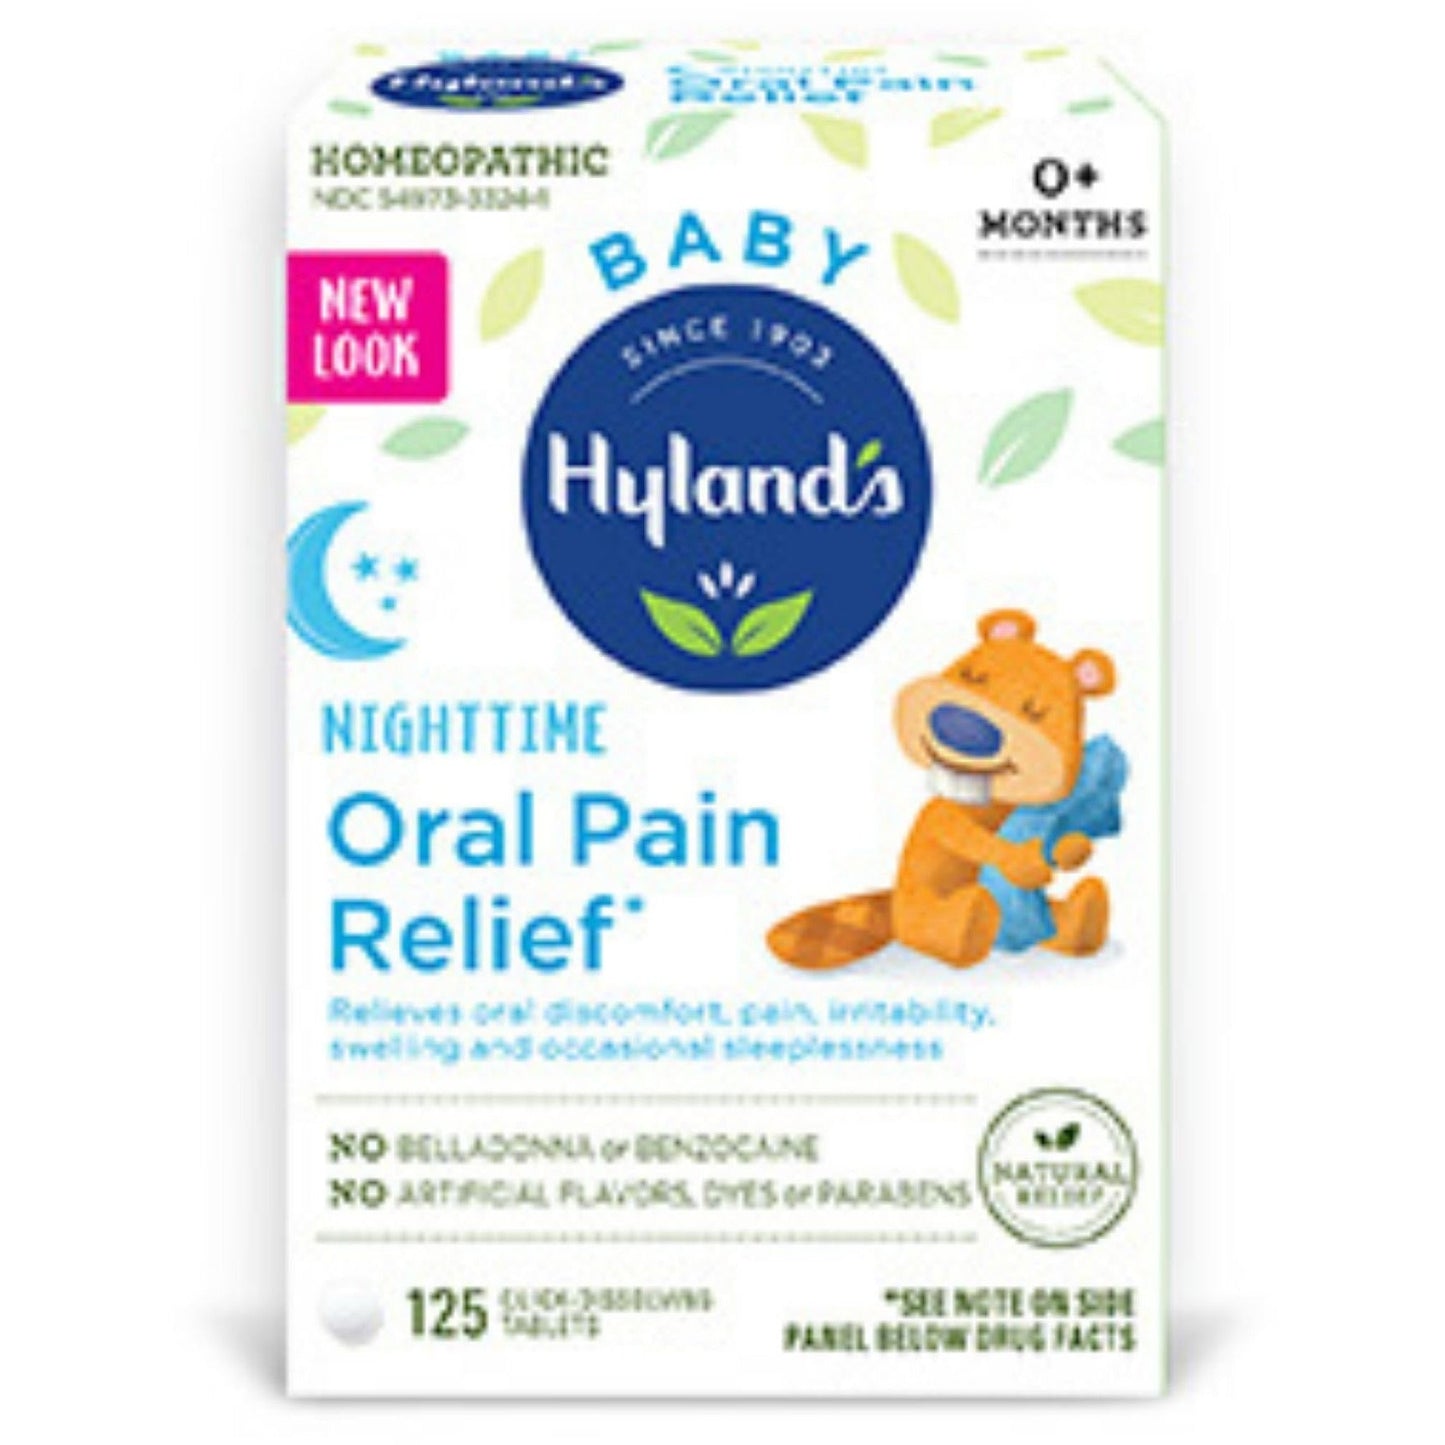 Hylands Homeopathic Nighttime Oral Pain Relief